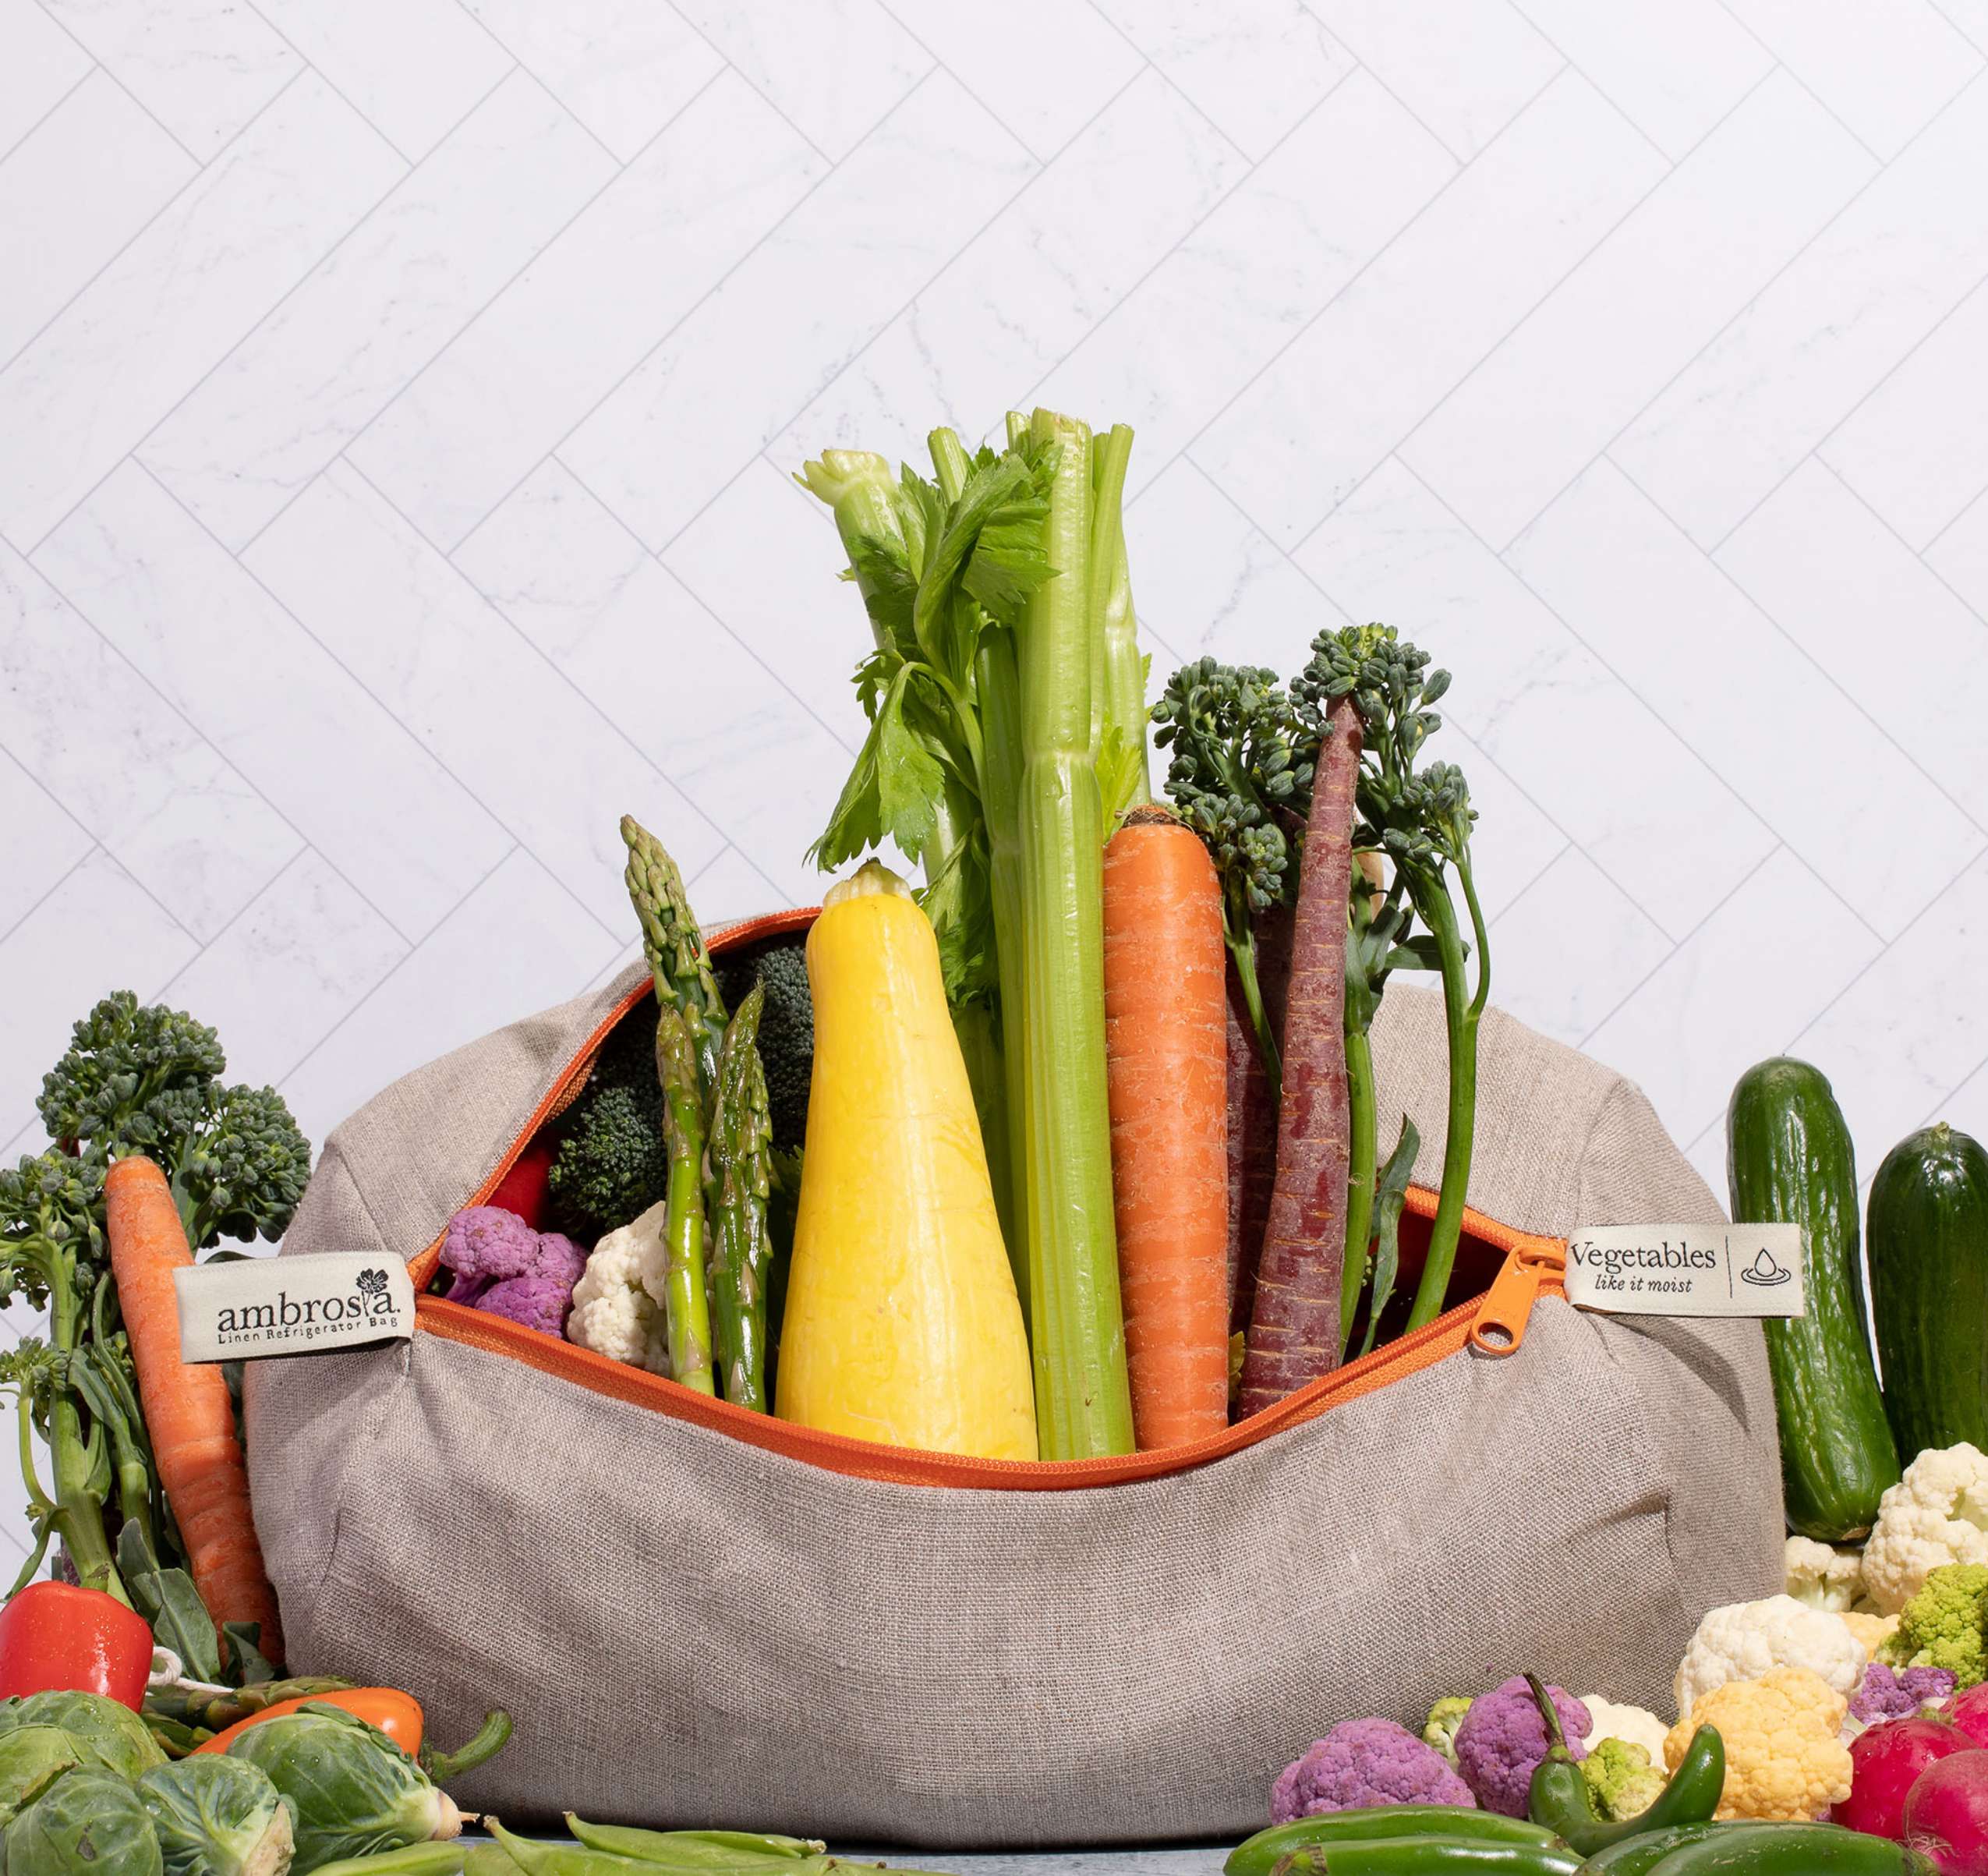 Ambrosia Produce Bags for vegetables